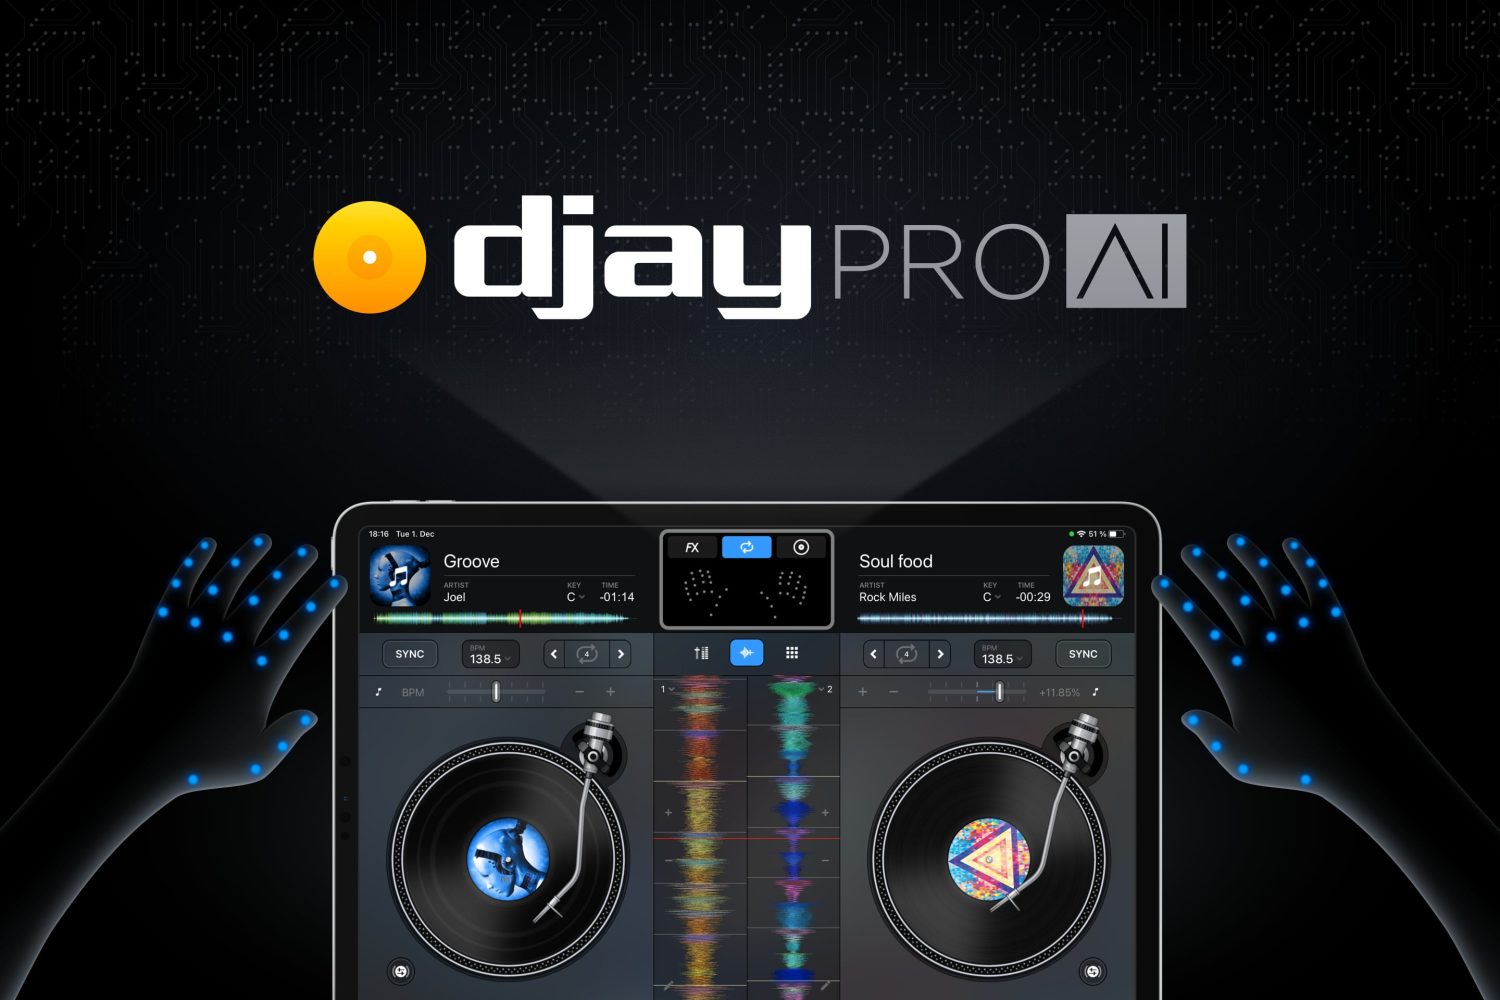 djay Pro AI instal the new version for apple